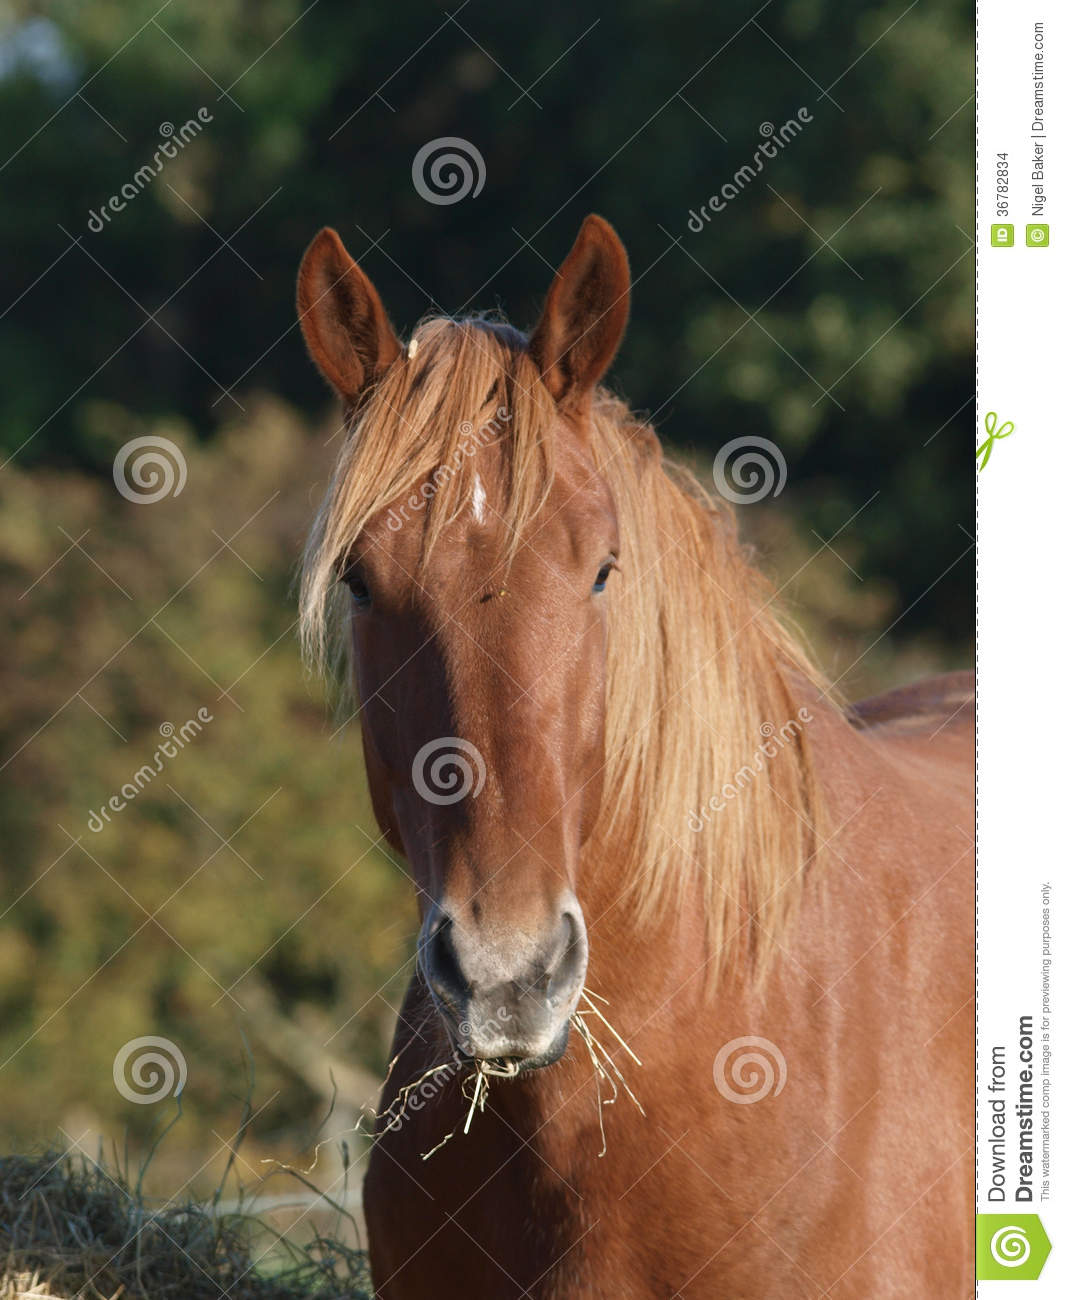 Horse Eating Hay Stock Images   Image  36782834